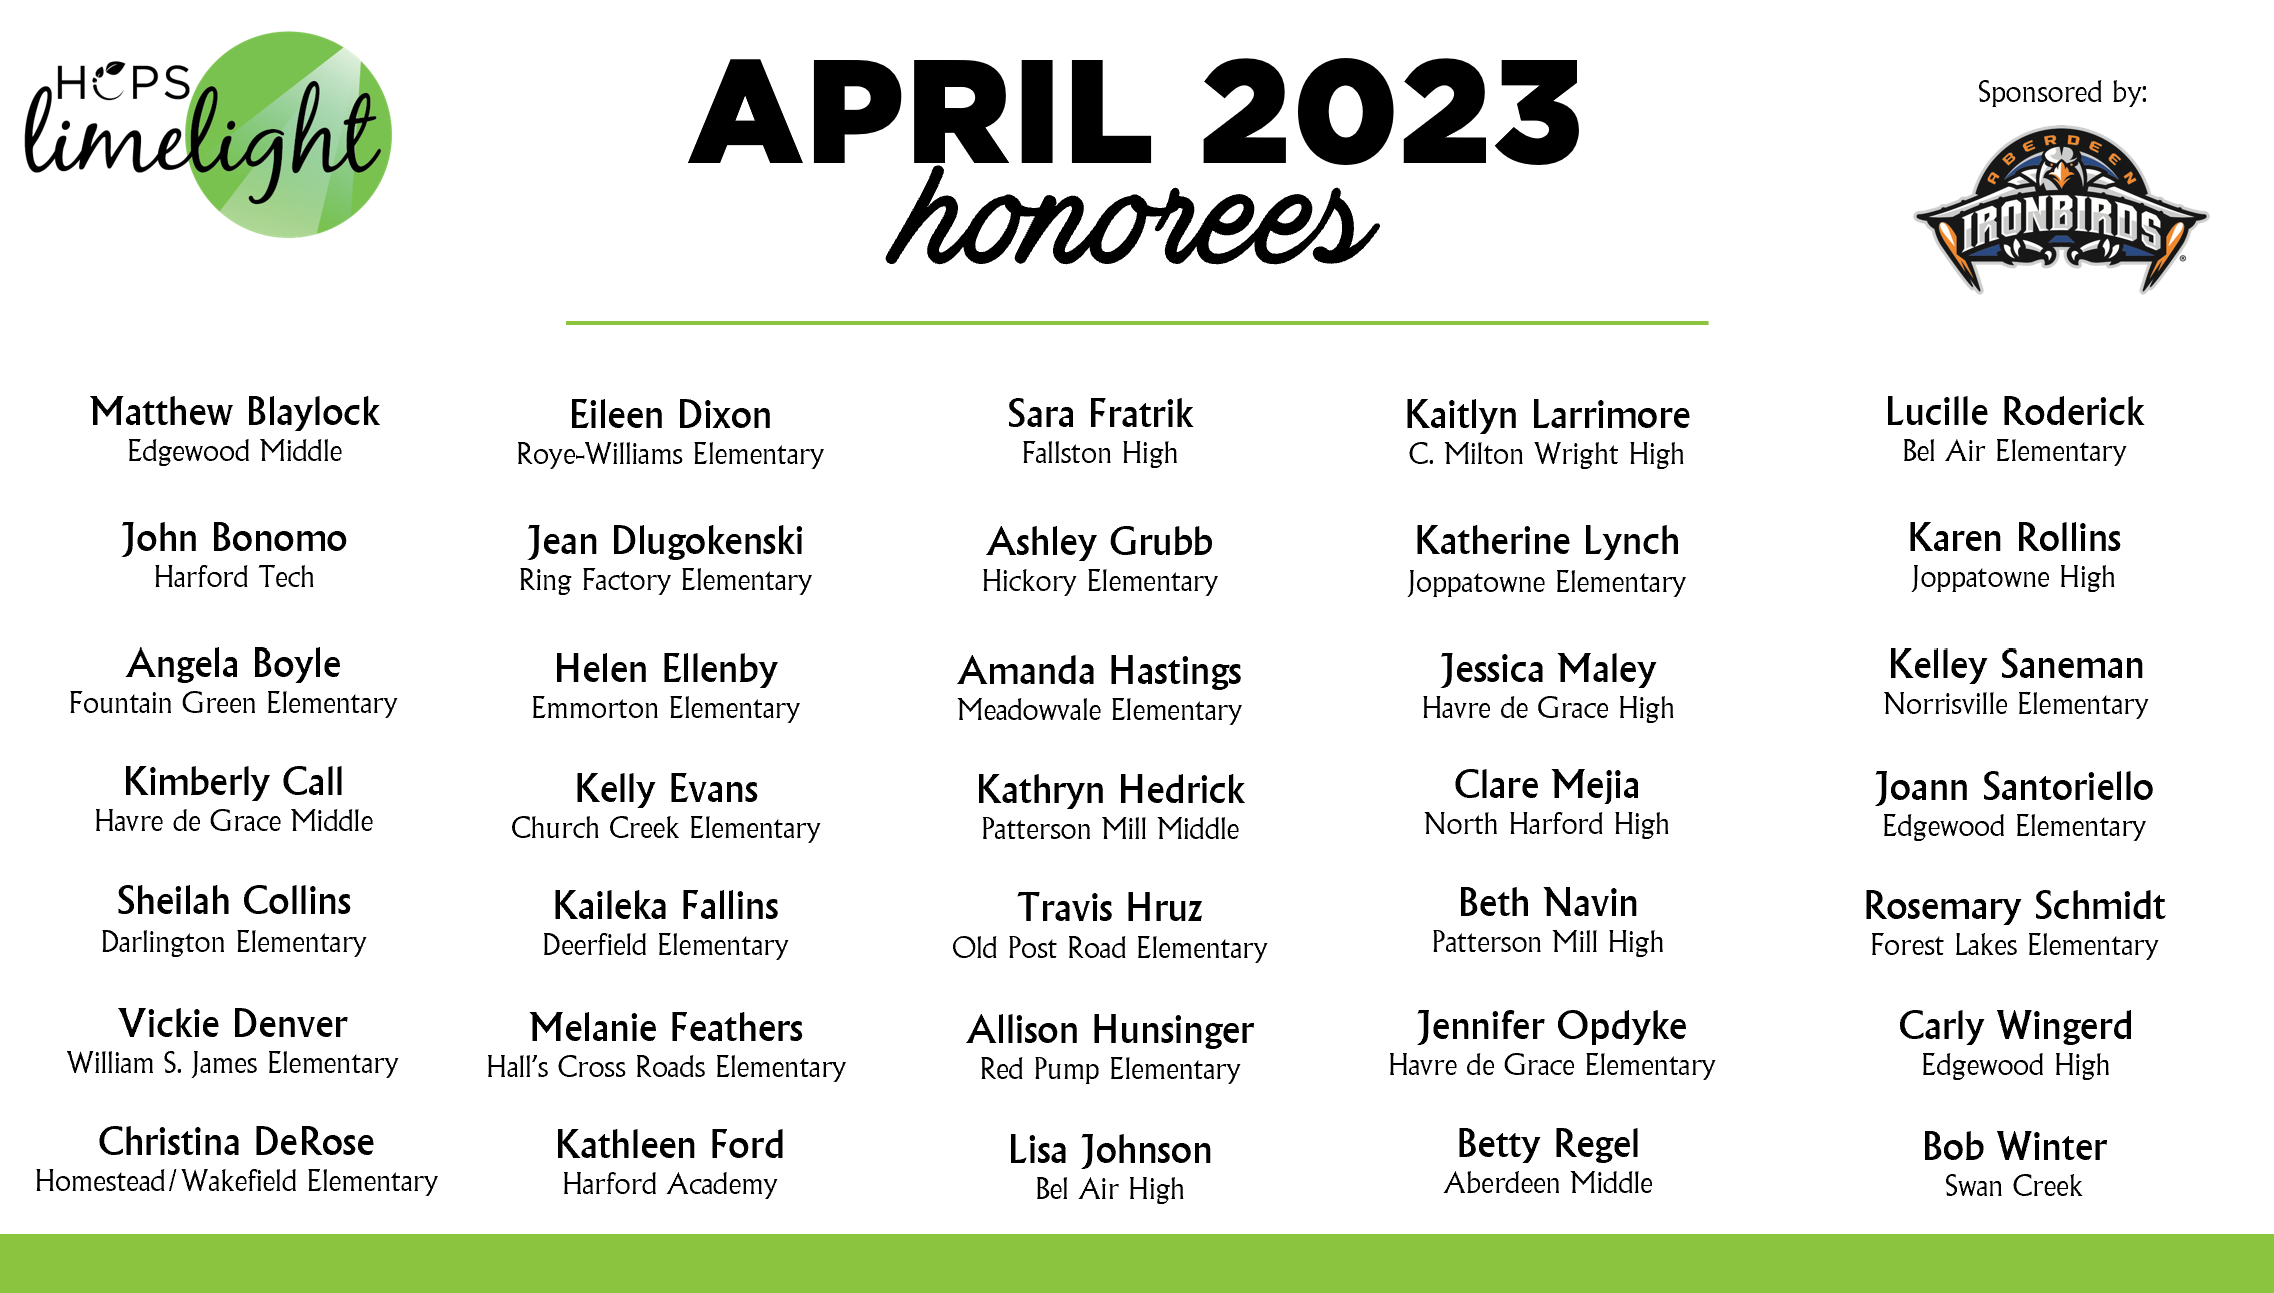 HCPS Limelight Honorees - April 2023